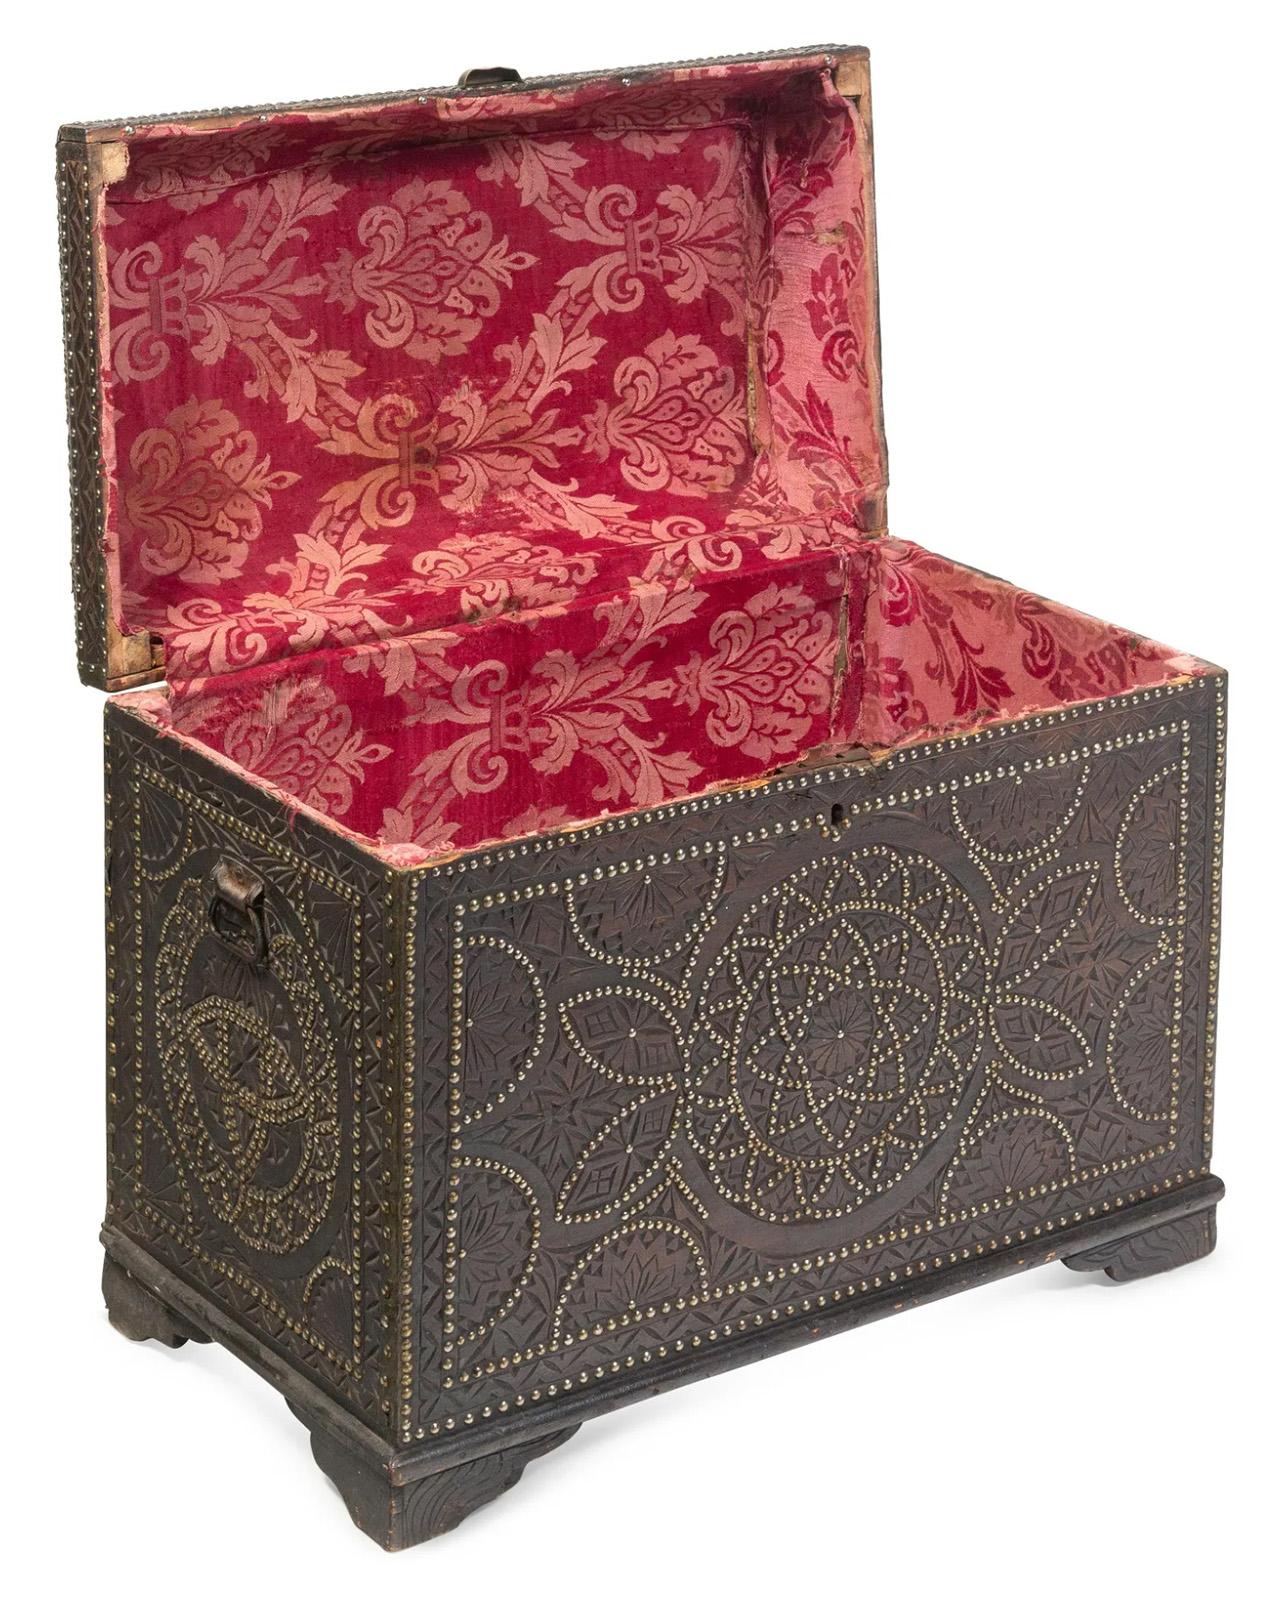 A Portuguese studded chest made from walnut, circa 1860.

Dimensions: 26.5